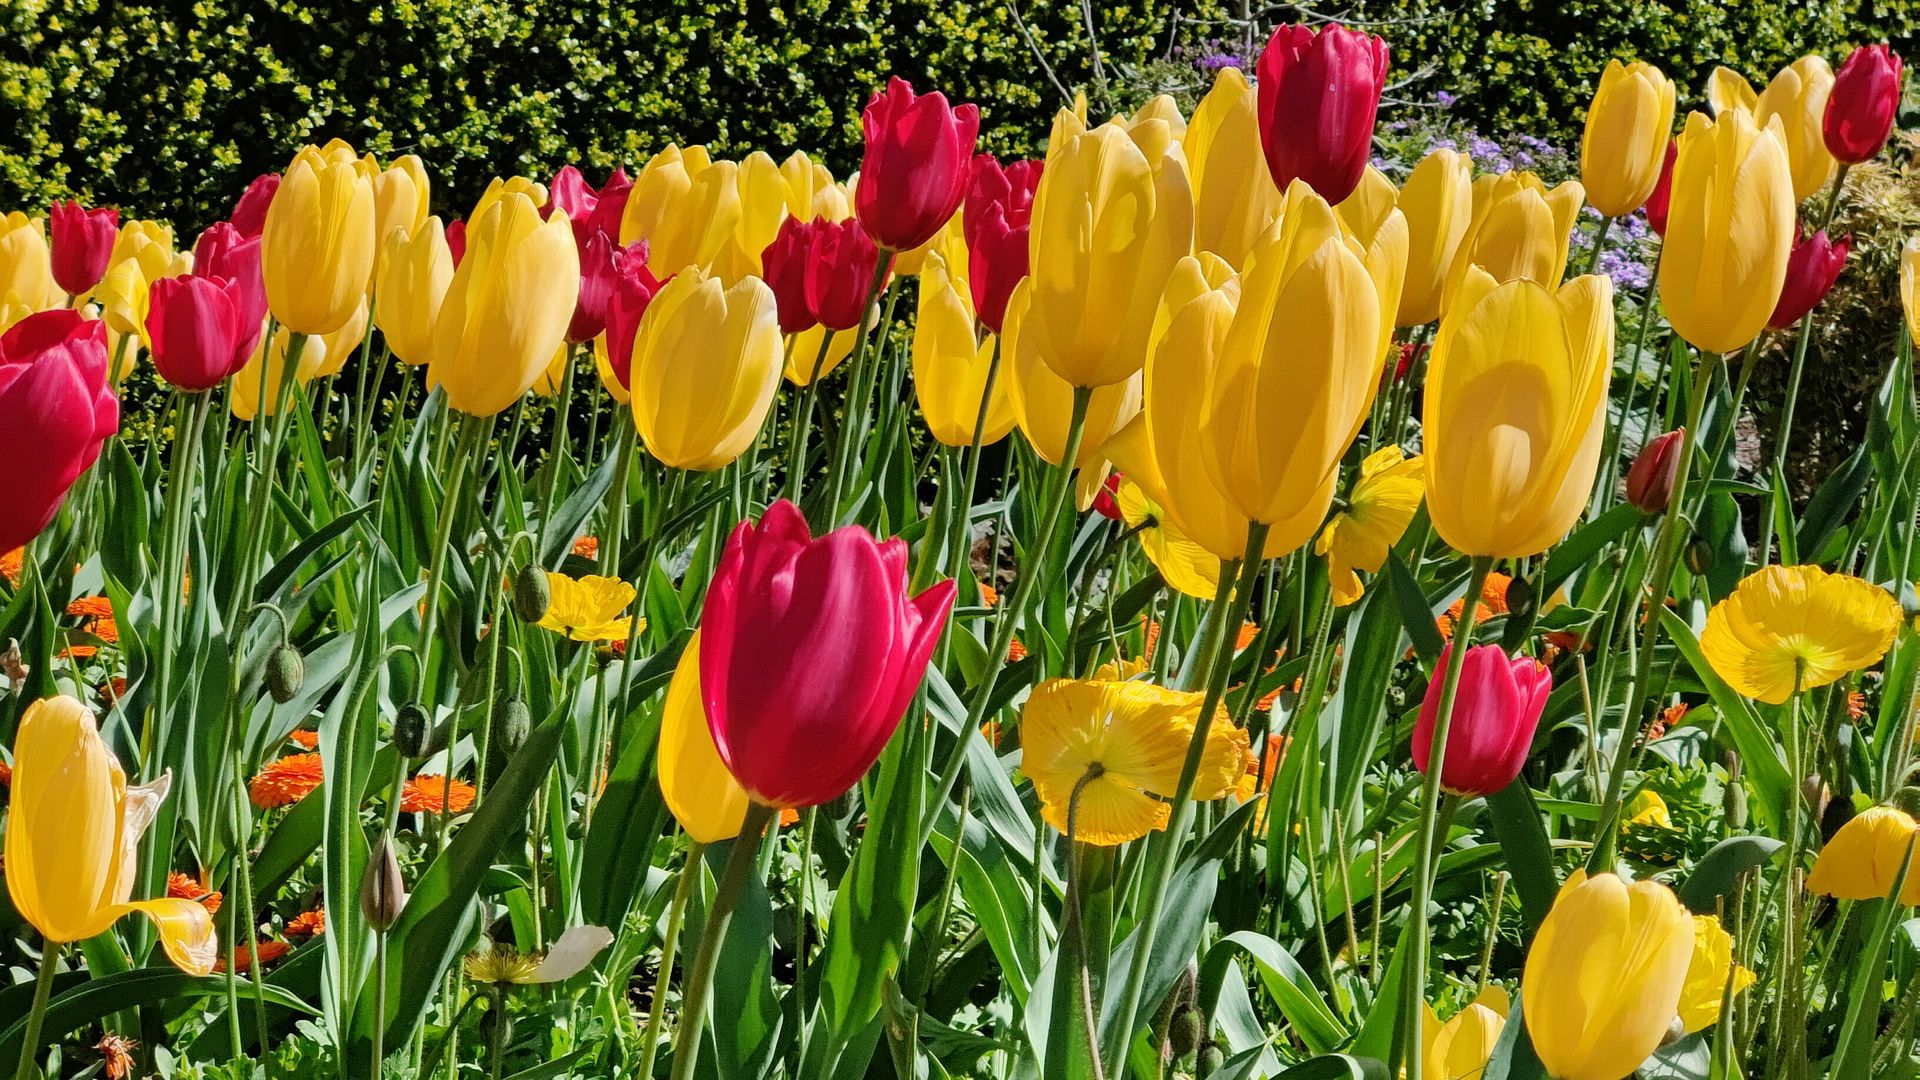 An image of yellow and red tulips in San Francisco's Golden Gate Park